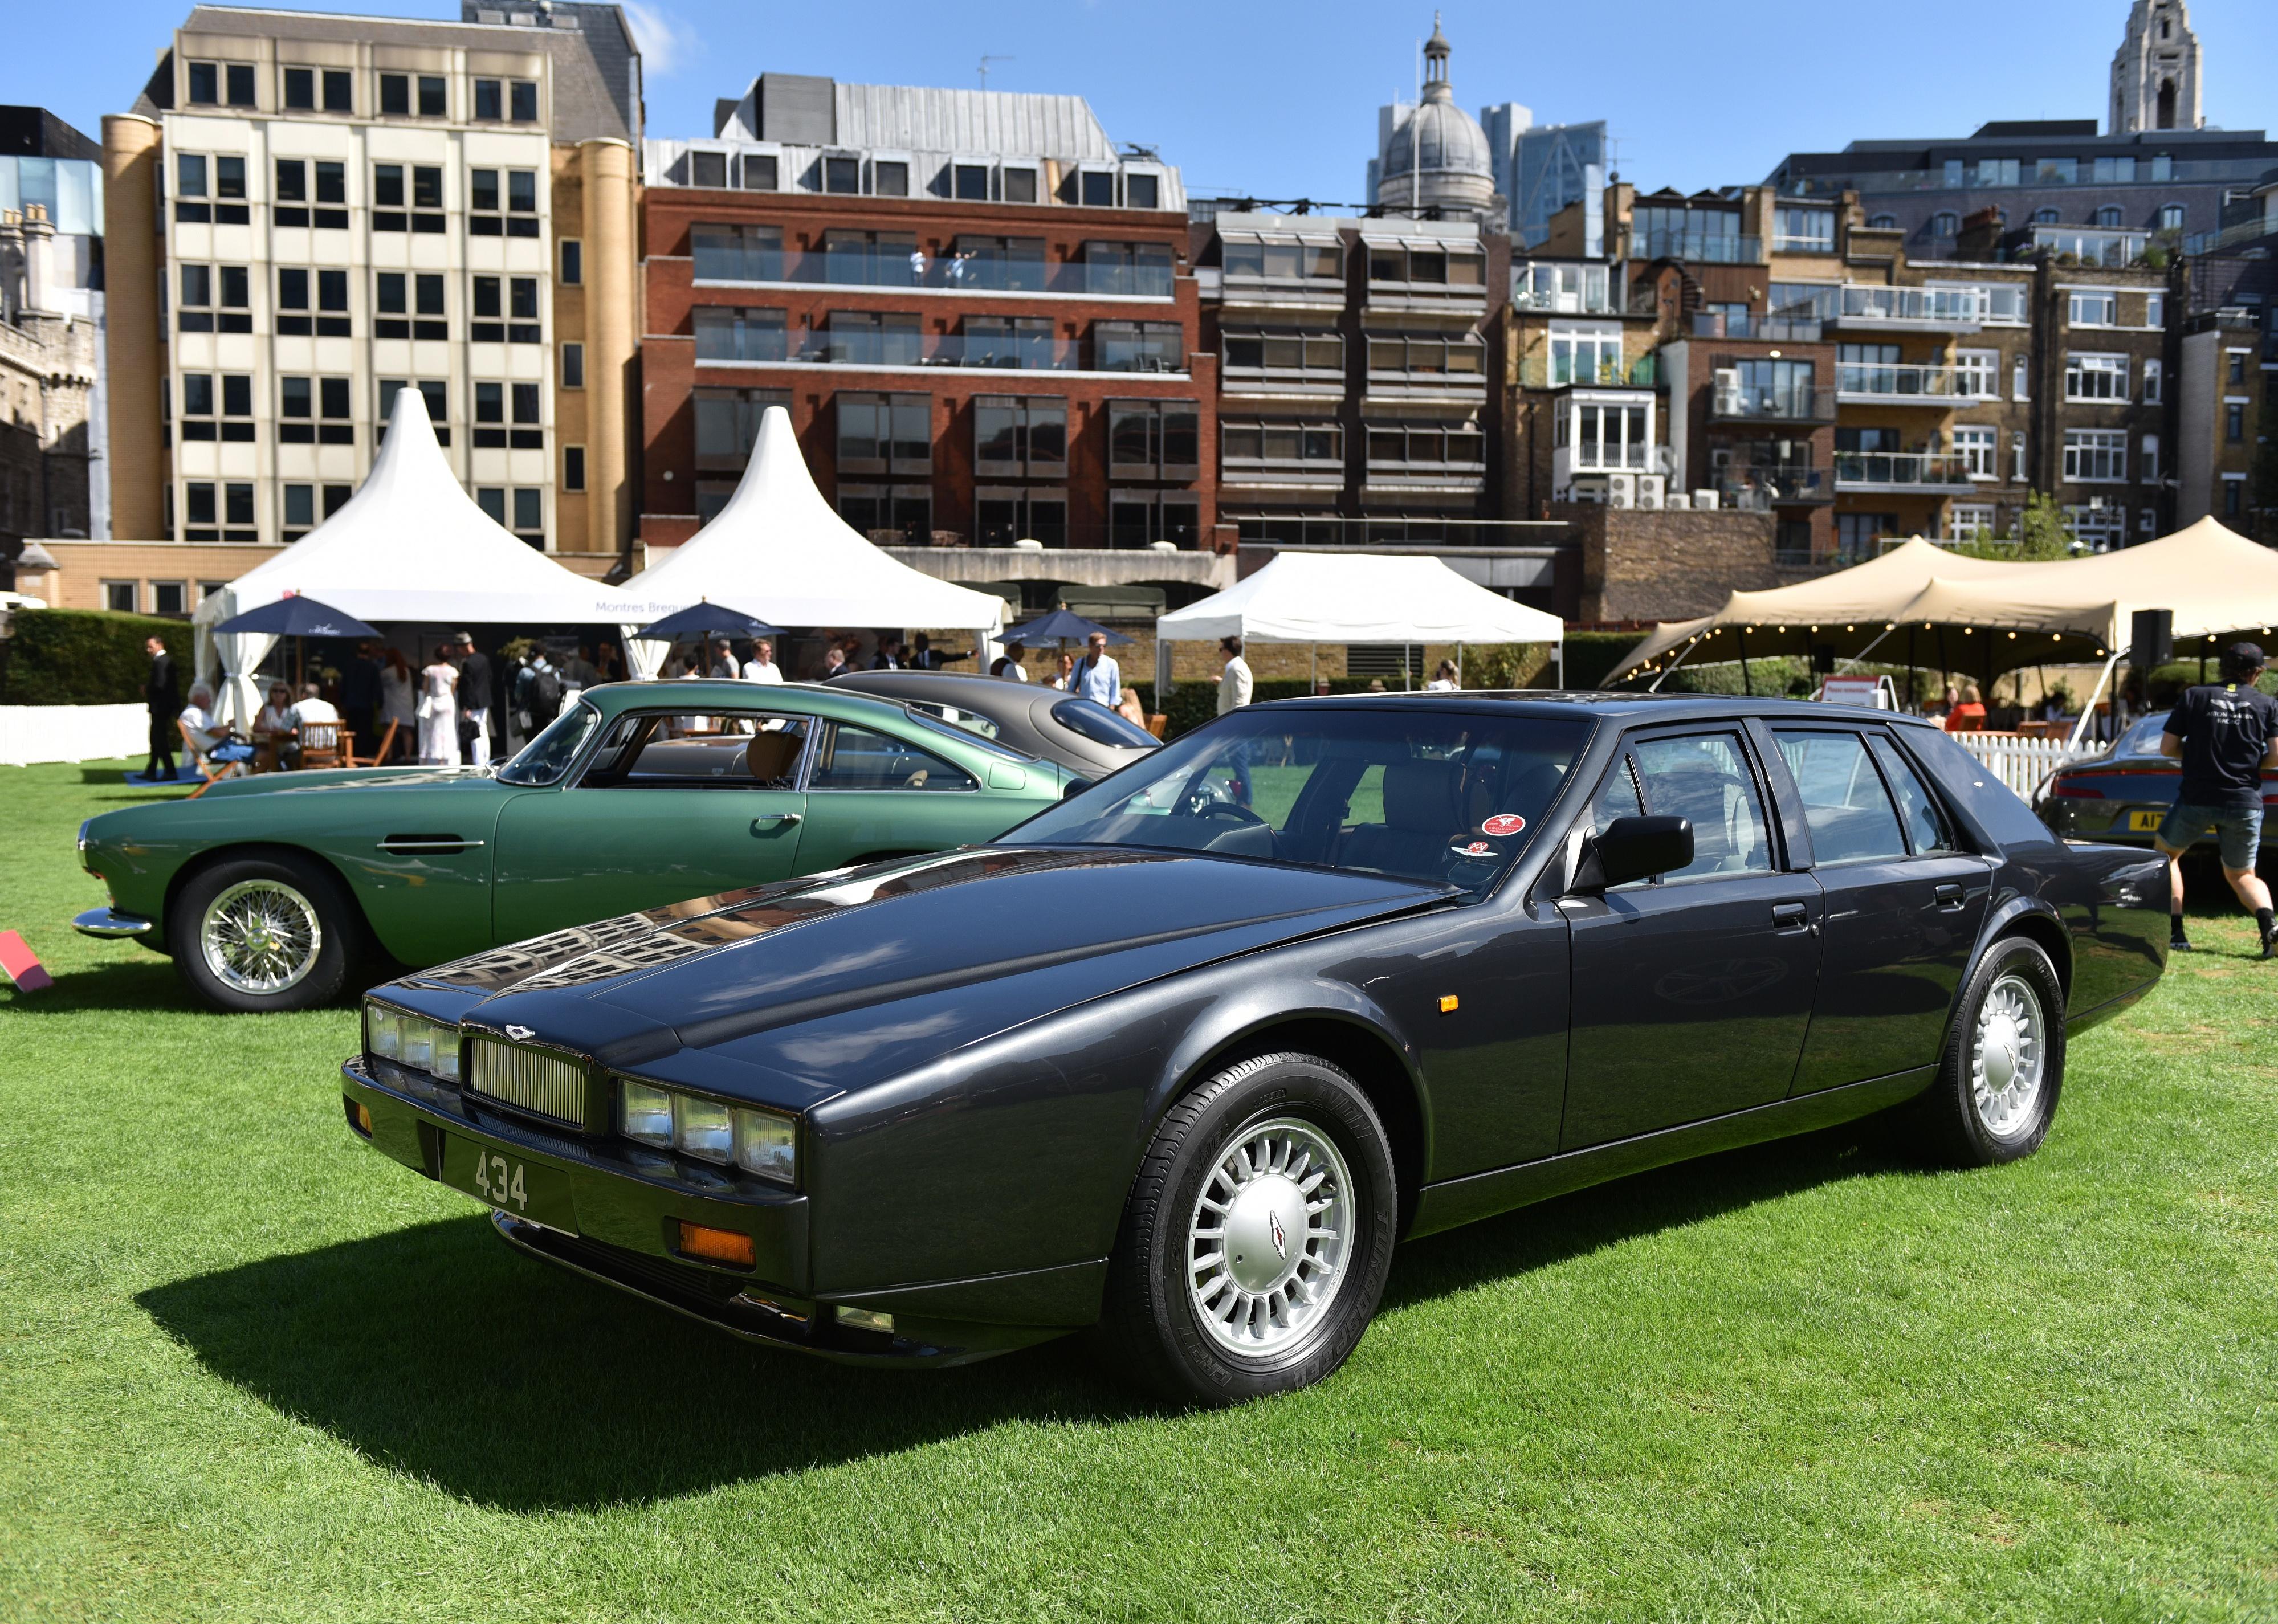 A 1990 Aston Martin Lagonda Saloon Series IV is displayed during the London Concour.